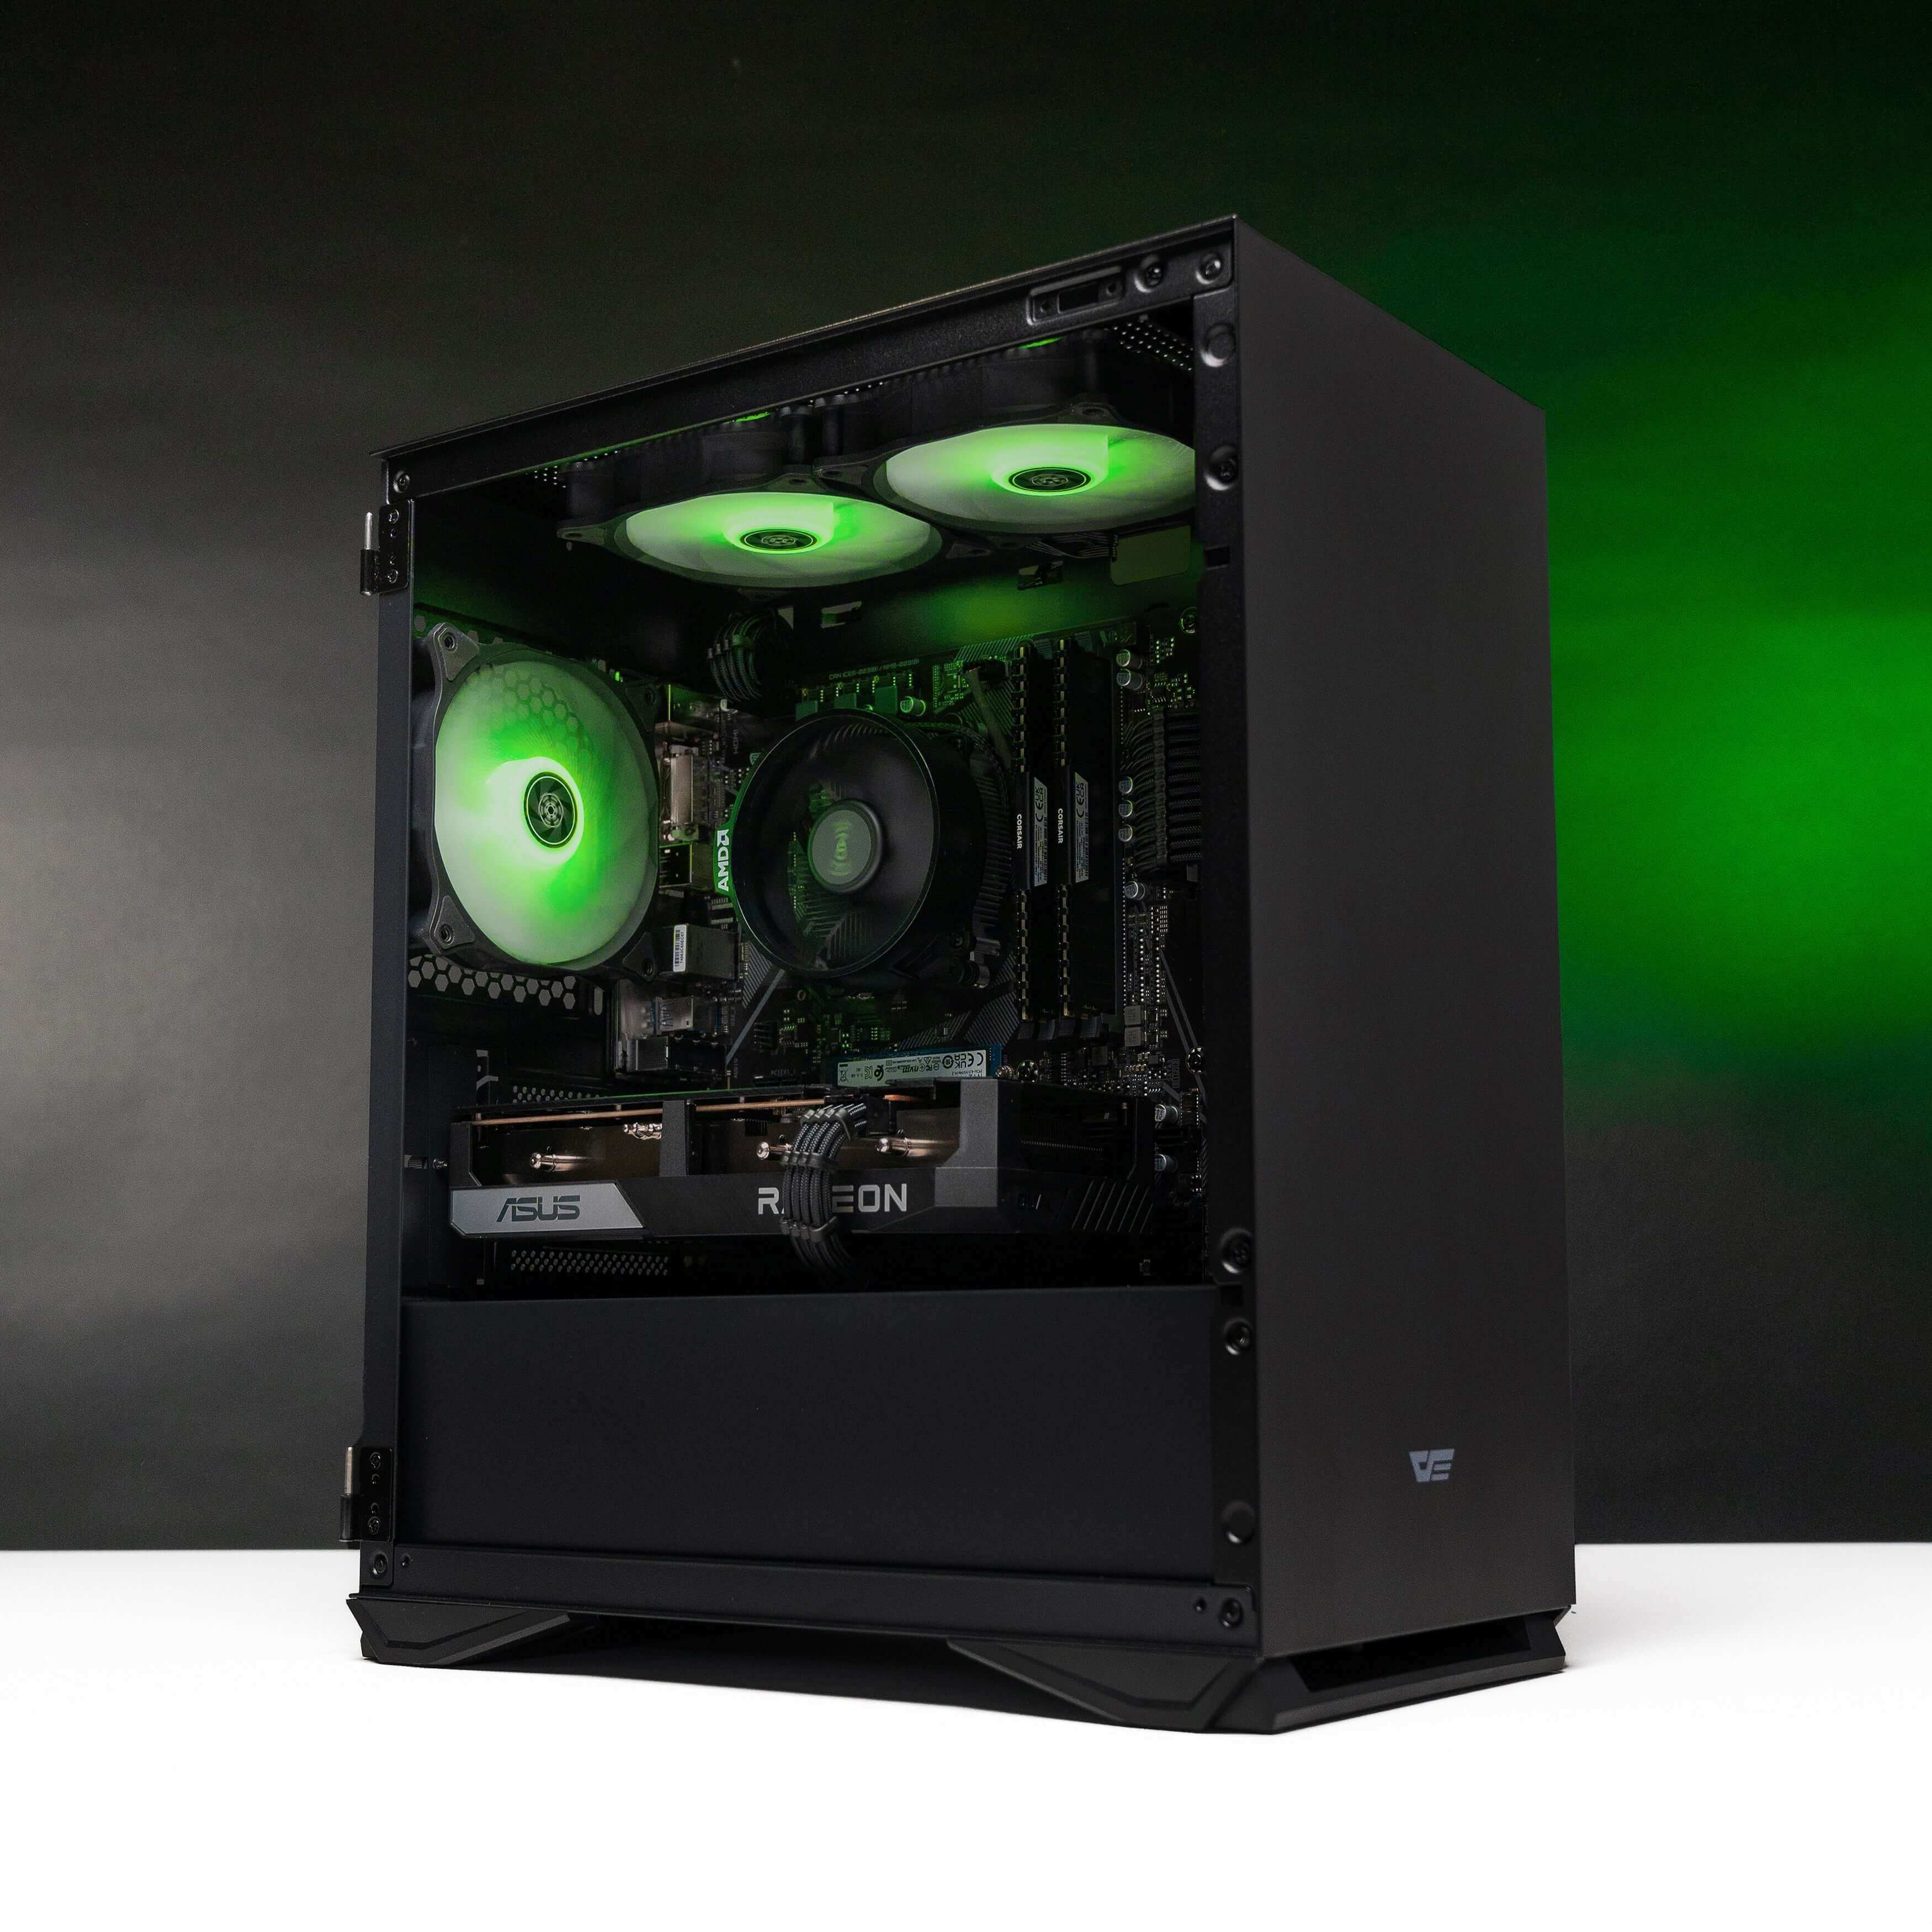 ARROW: LVL 3 Gaming PC featuring the efficient AMD Wraith Stealth cooler and reliable FSP Hydro K PRO 550W 80+ Bronze power supply.